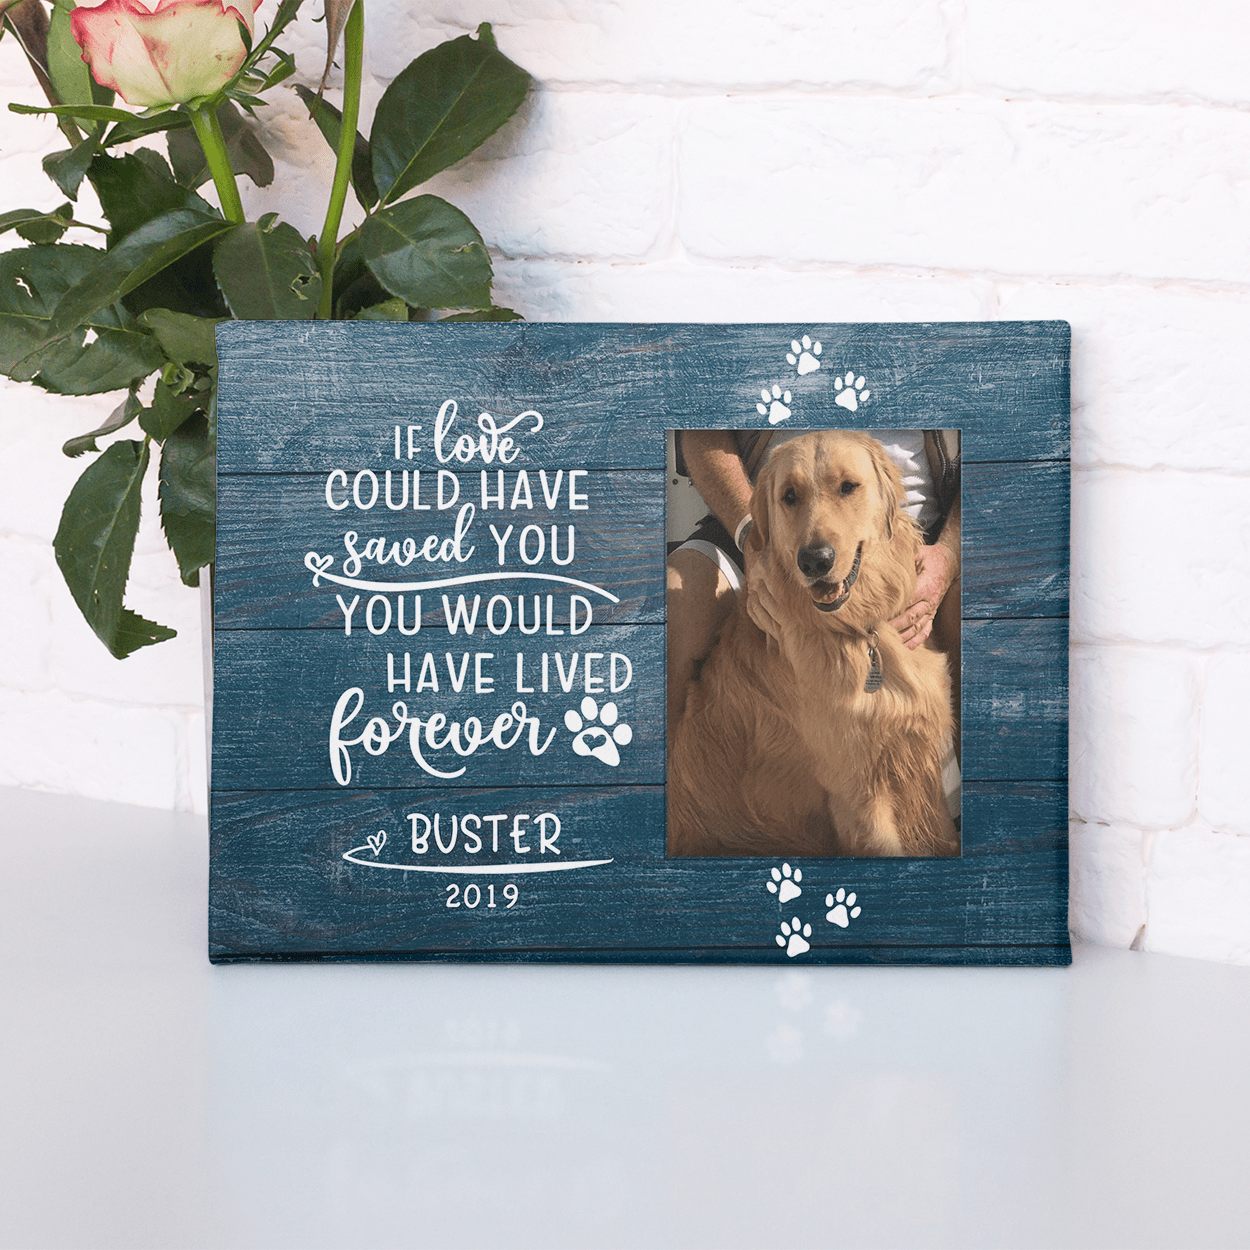 GeckoCustom Personalized Custom Print Canvas, Dog Lover Gift, If Love Could Have Saved You, You Would Have Lived Forever 24"x16"